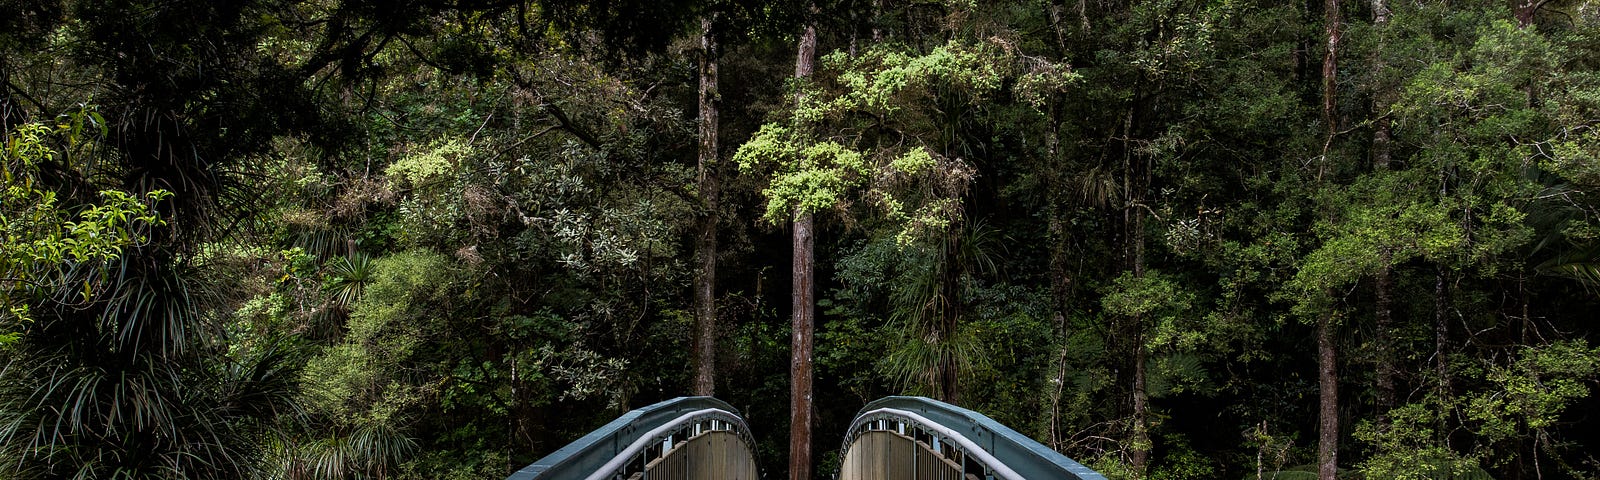 A wooden bridge leading to a nature forest